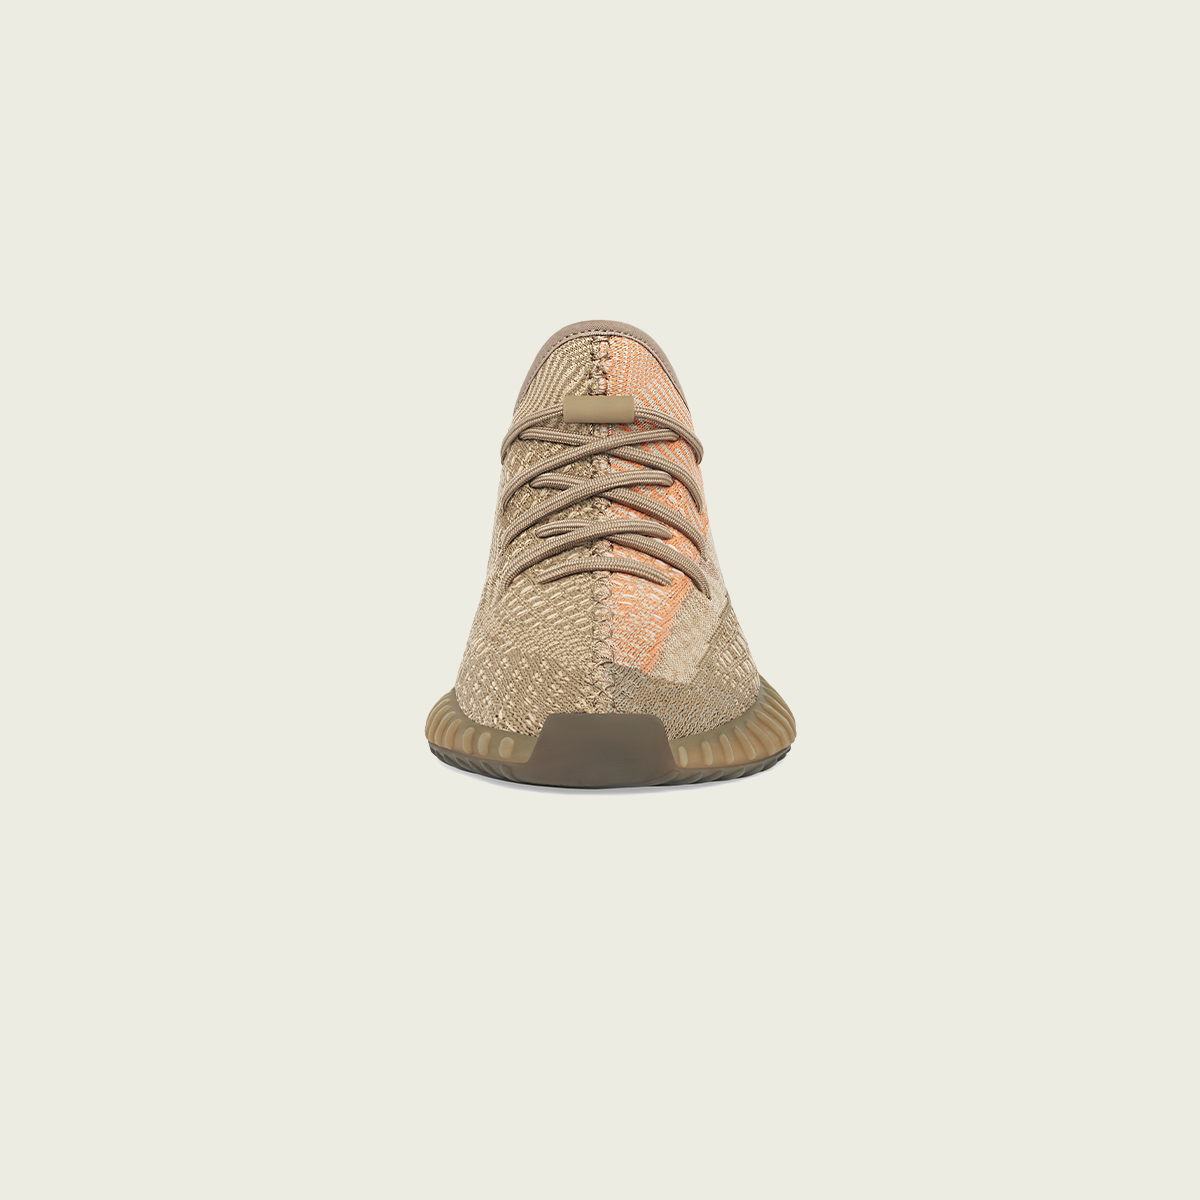 YEEZY BOOST 350 V2 SAND TAUPE Front Social IG 1200×1200